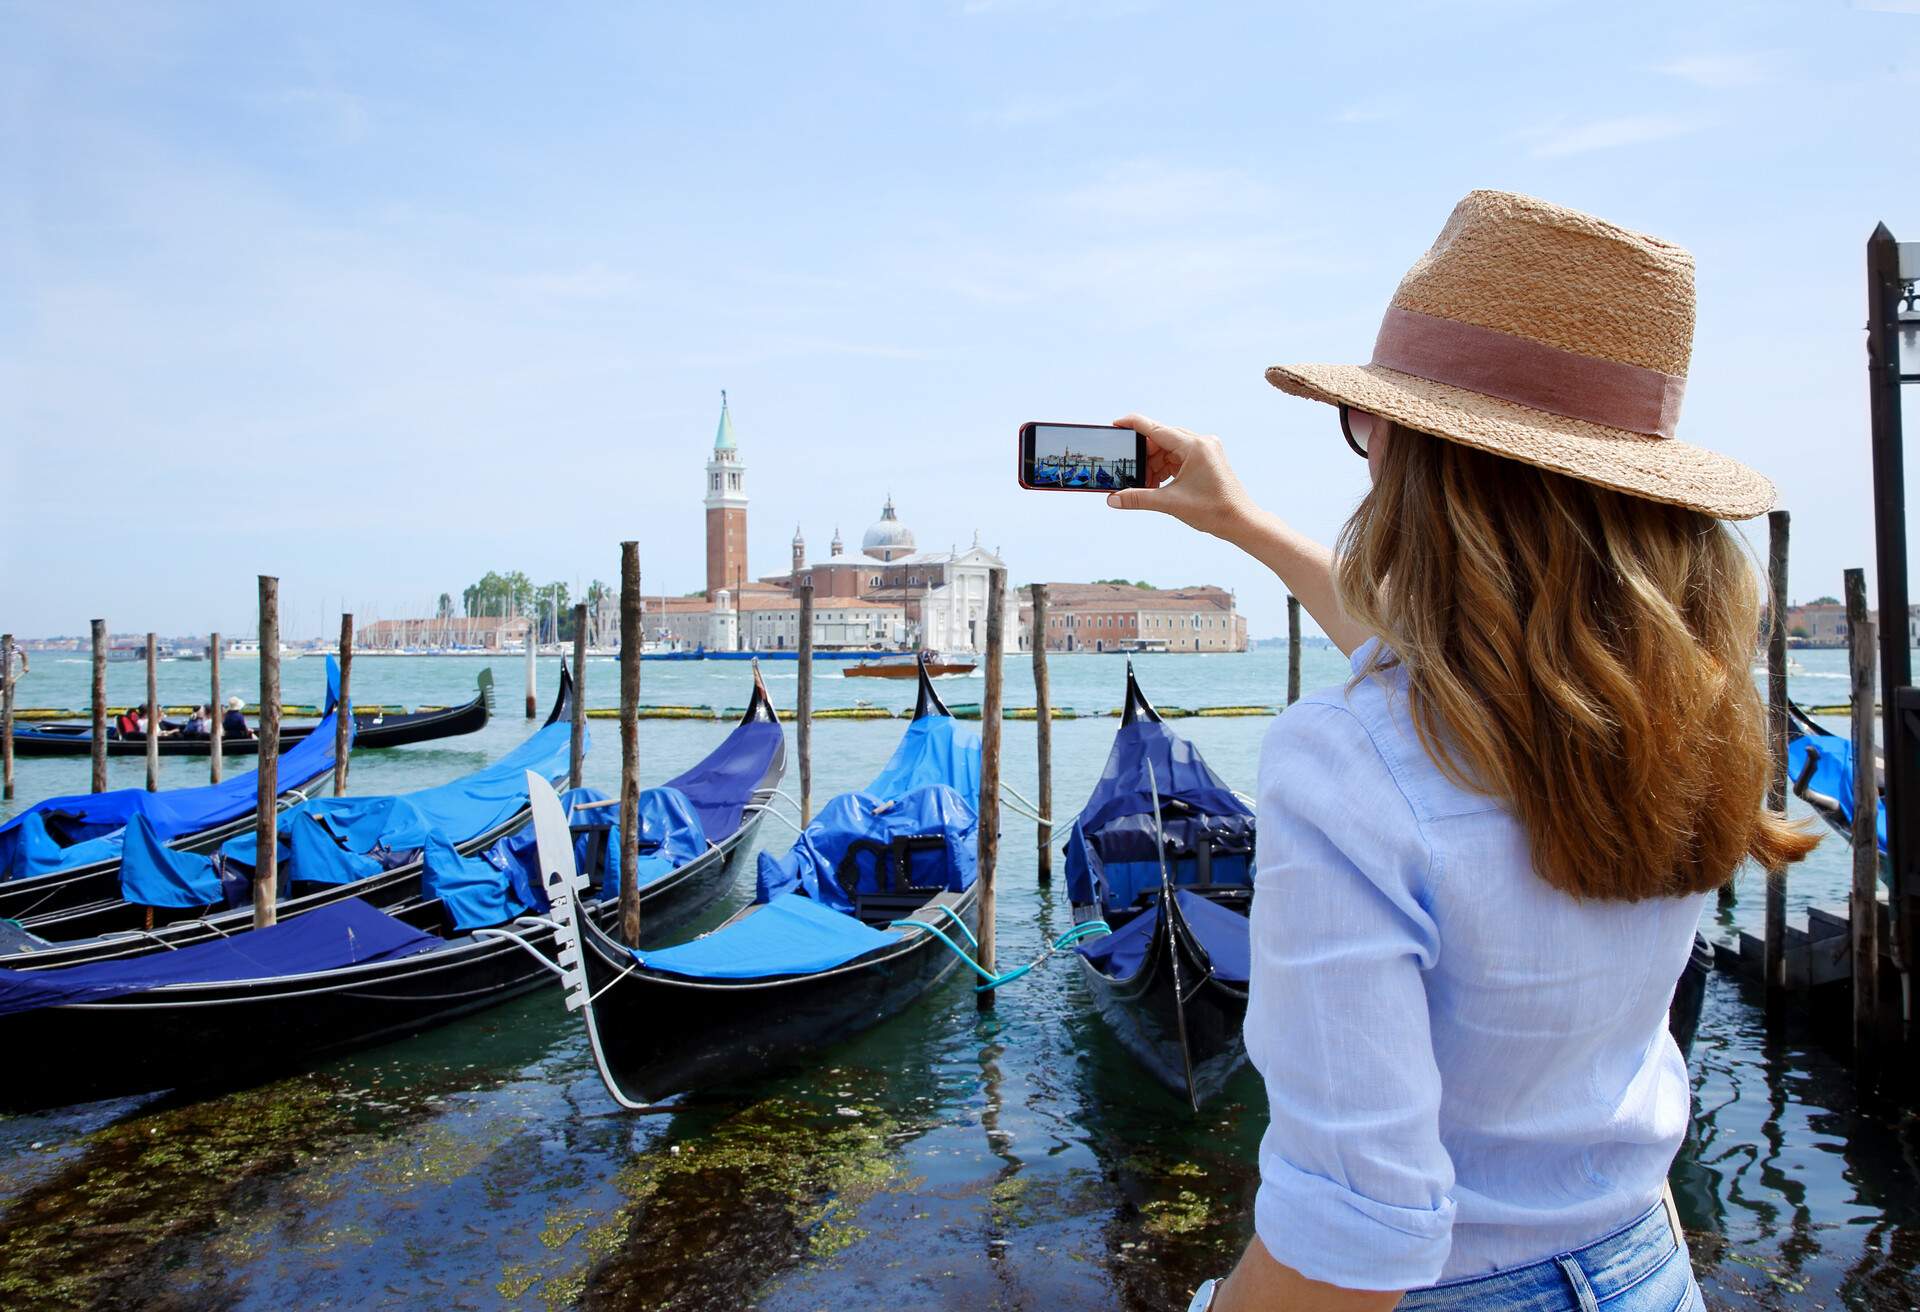 Rear view shot of a female tourist with mobile phone capturing the moments while on Venice at canal.; Shutterstock ID 497230141